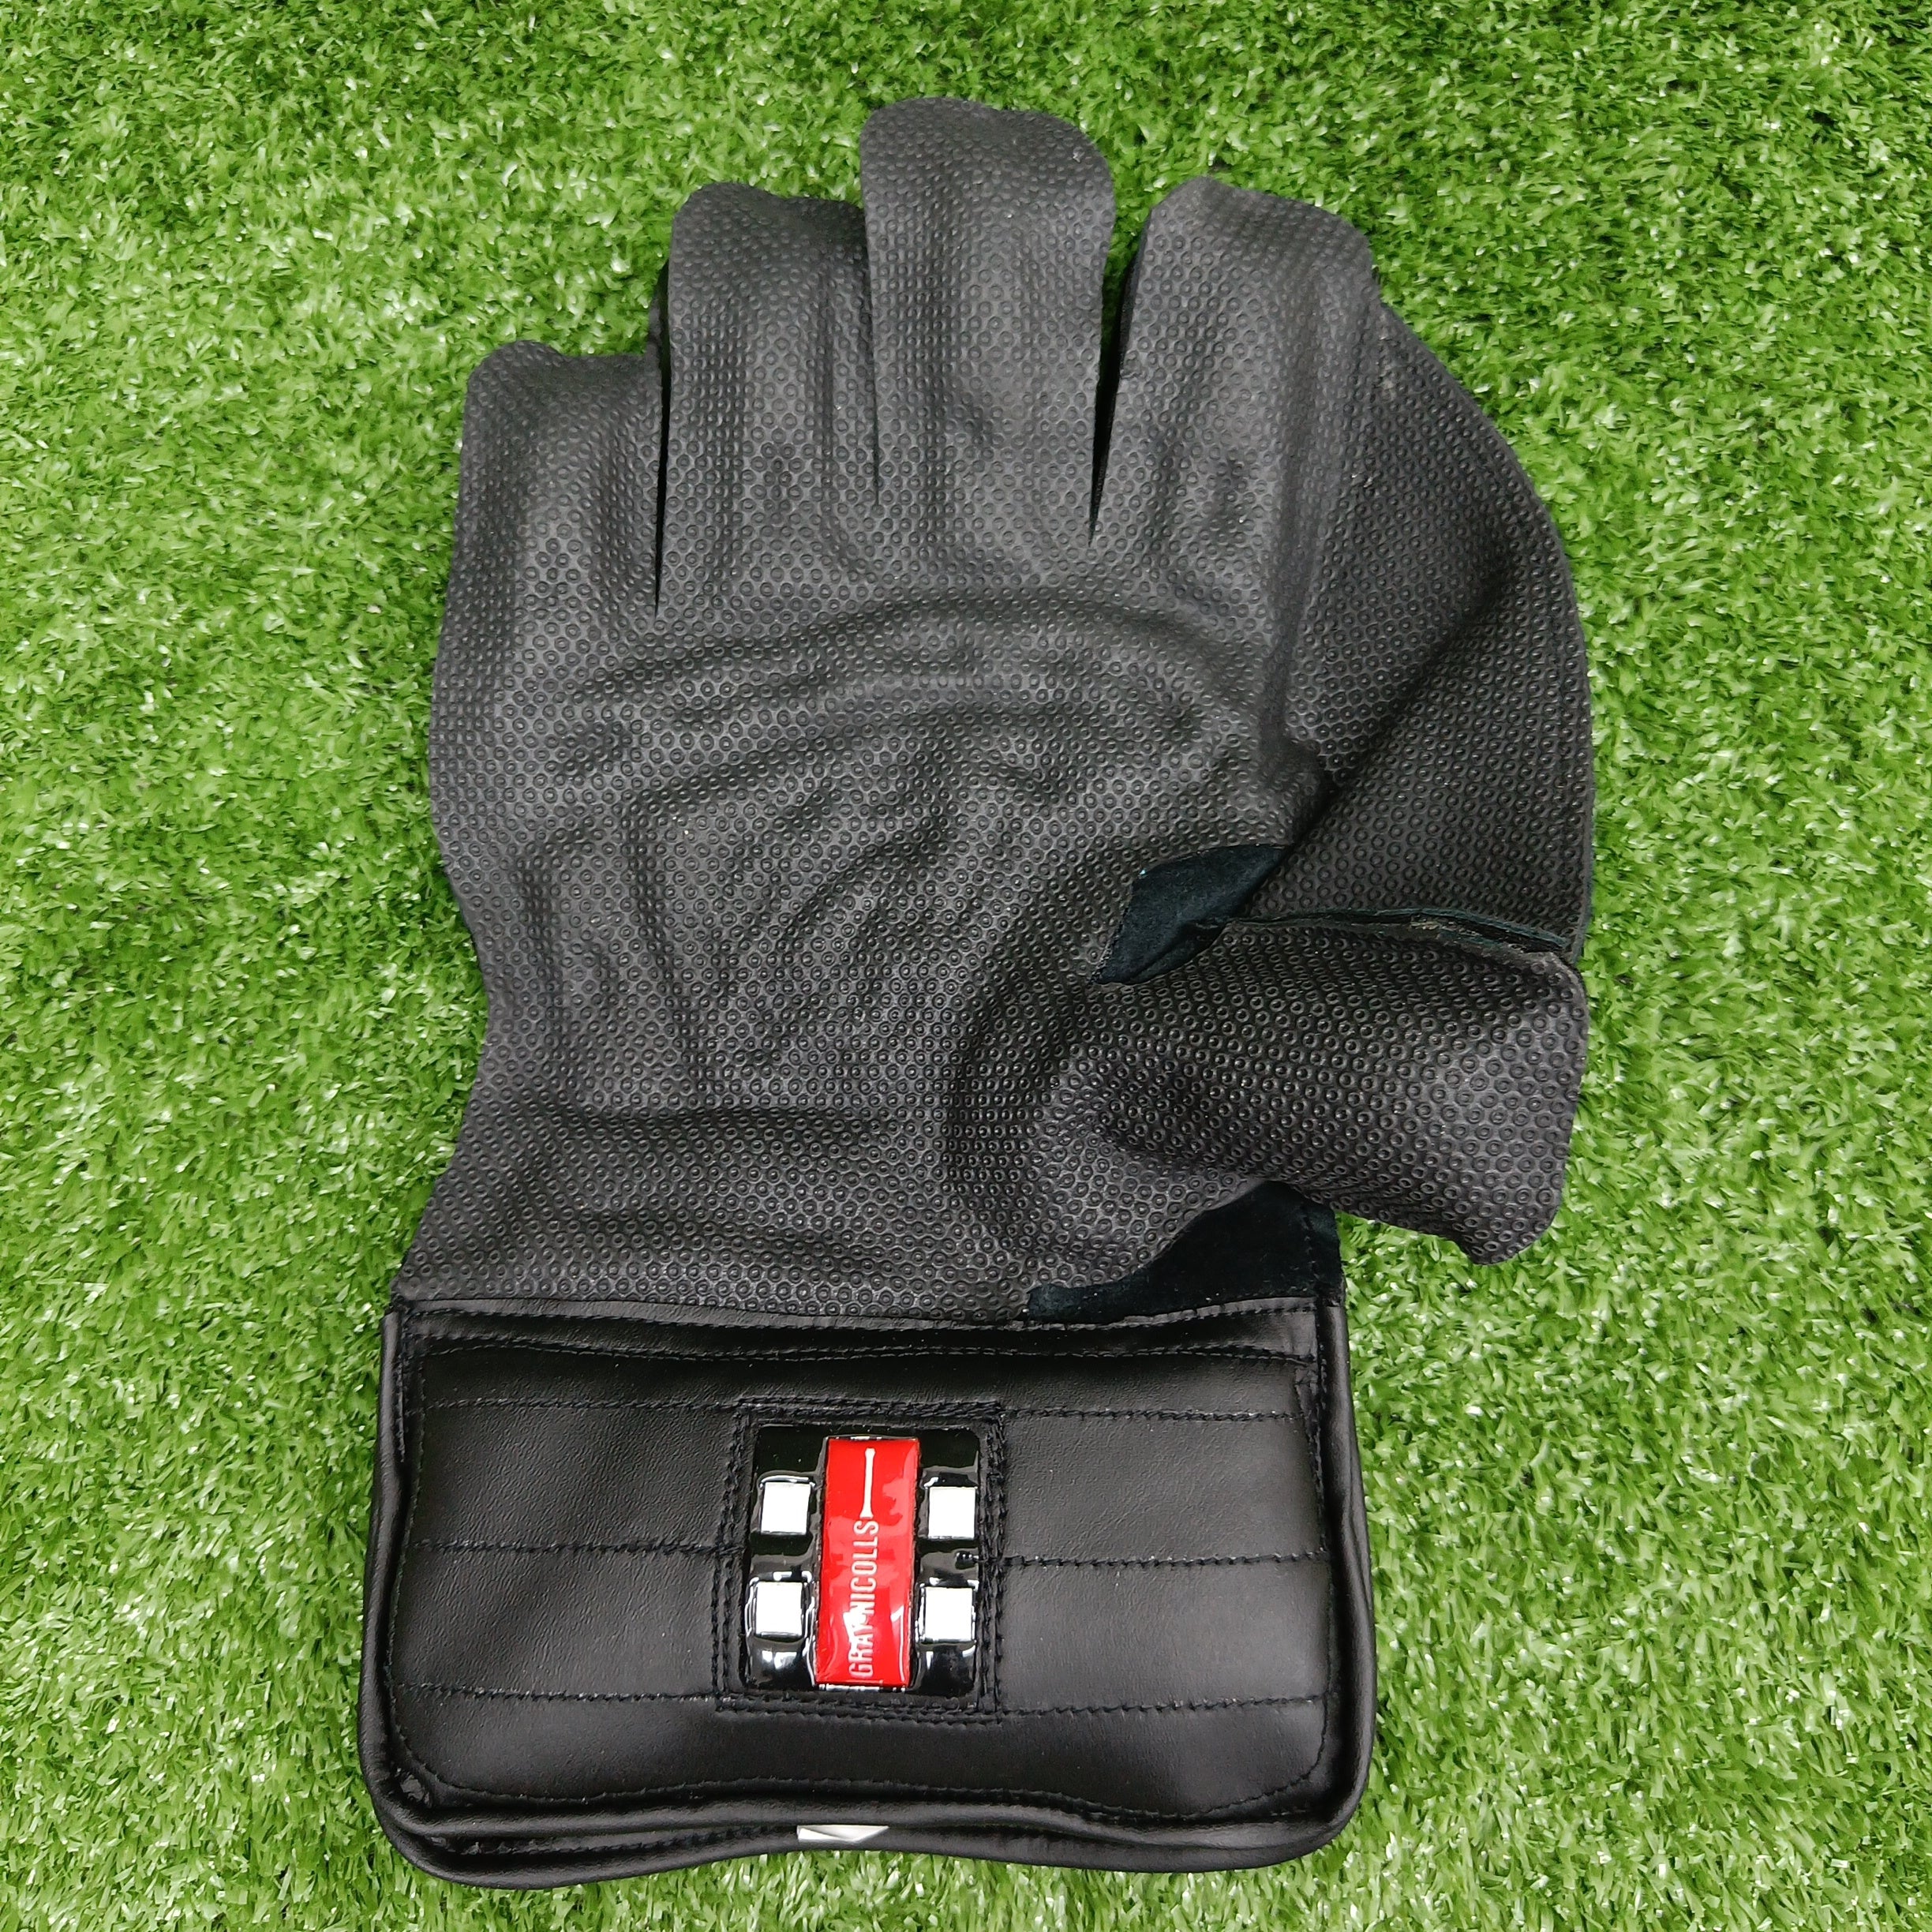 Gray-Nicolls Black Limited Edition Adult Cricket Wicket Keeping Gloves Black